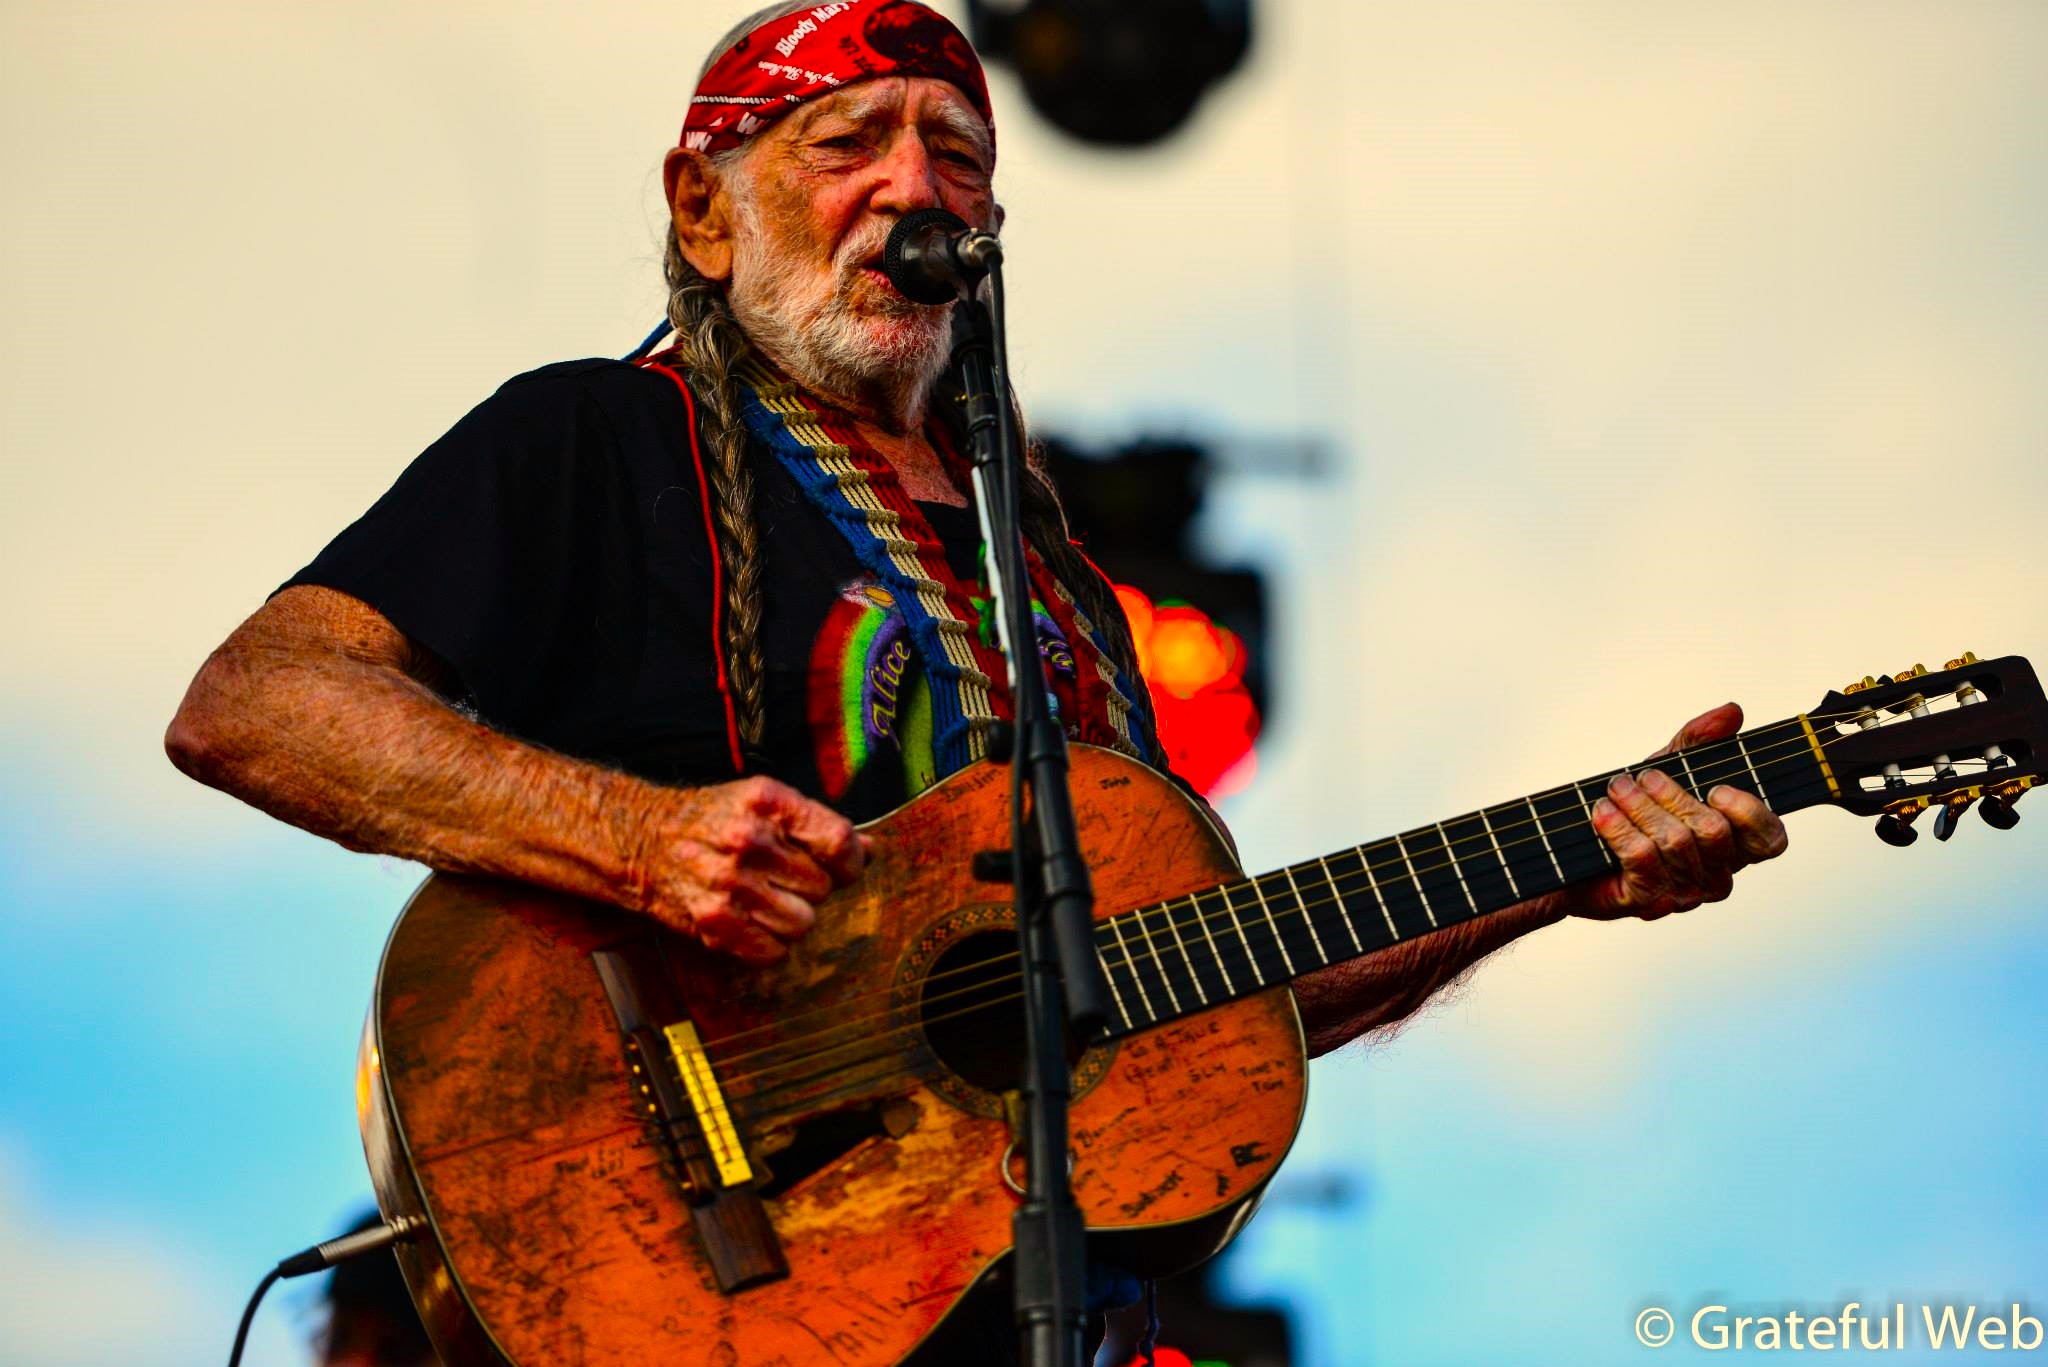 Outlaw, Icon, Activist: Willie Nelson’s 91st Year on Earth